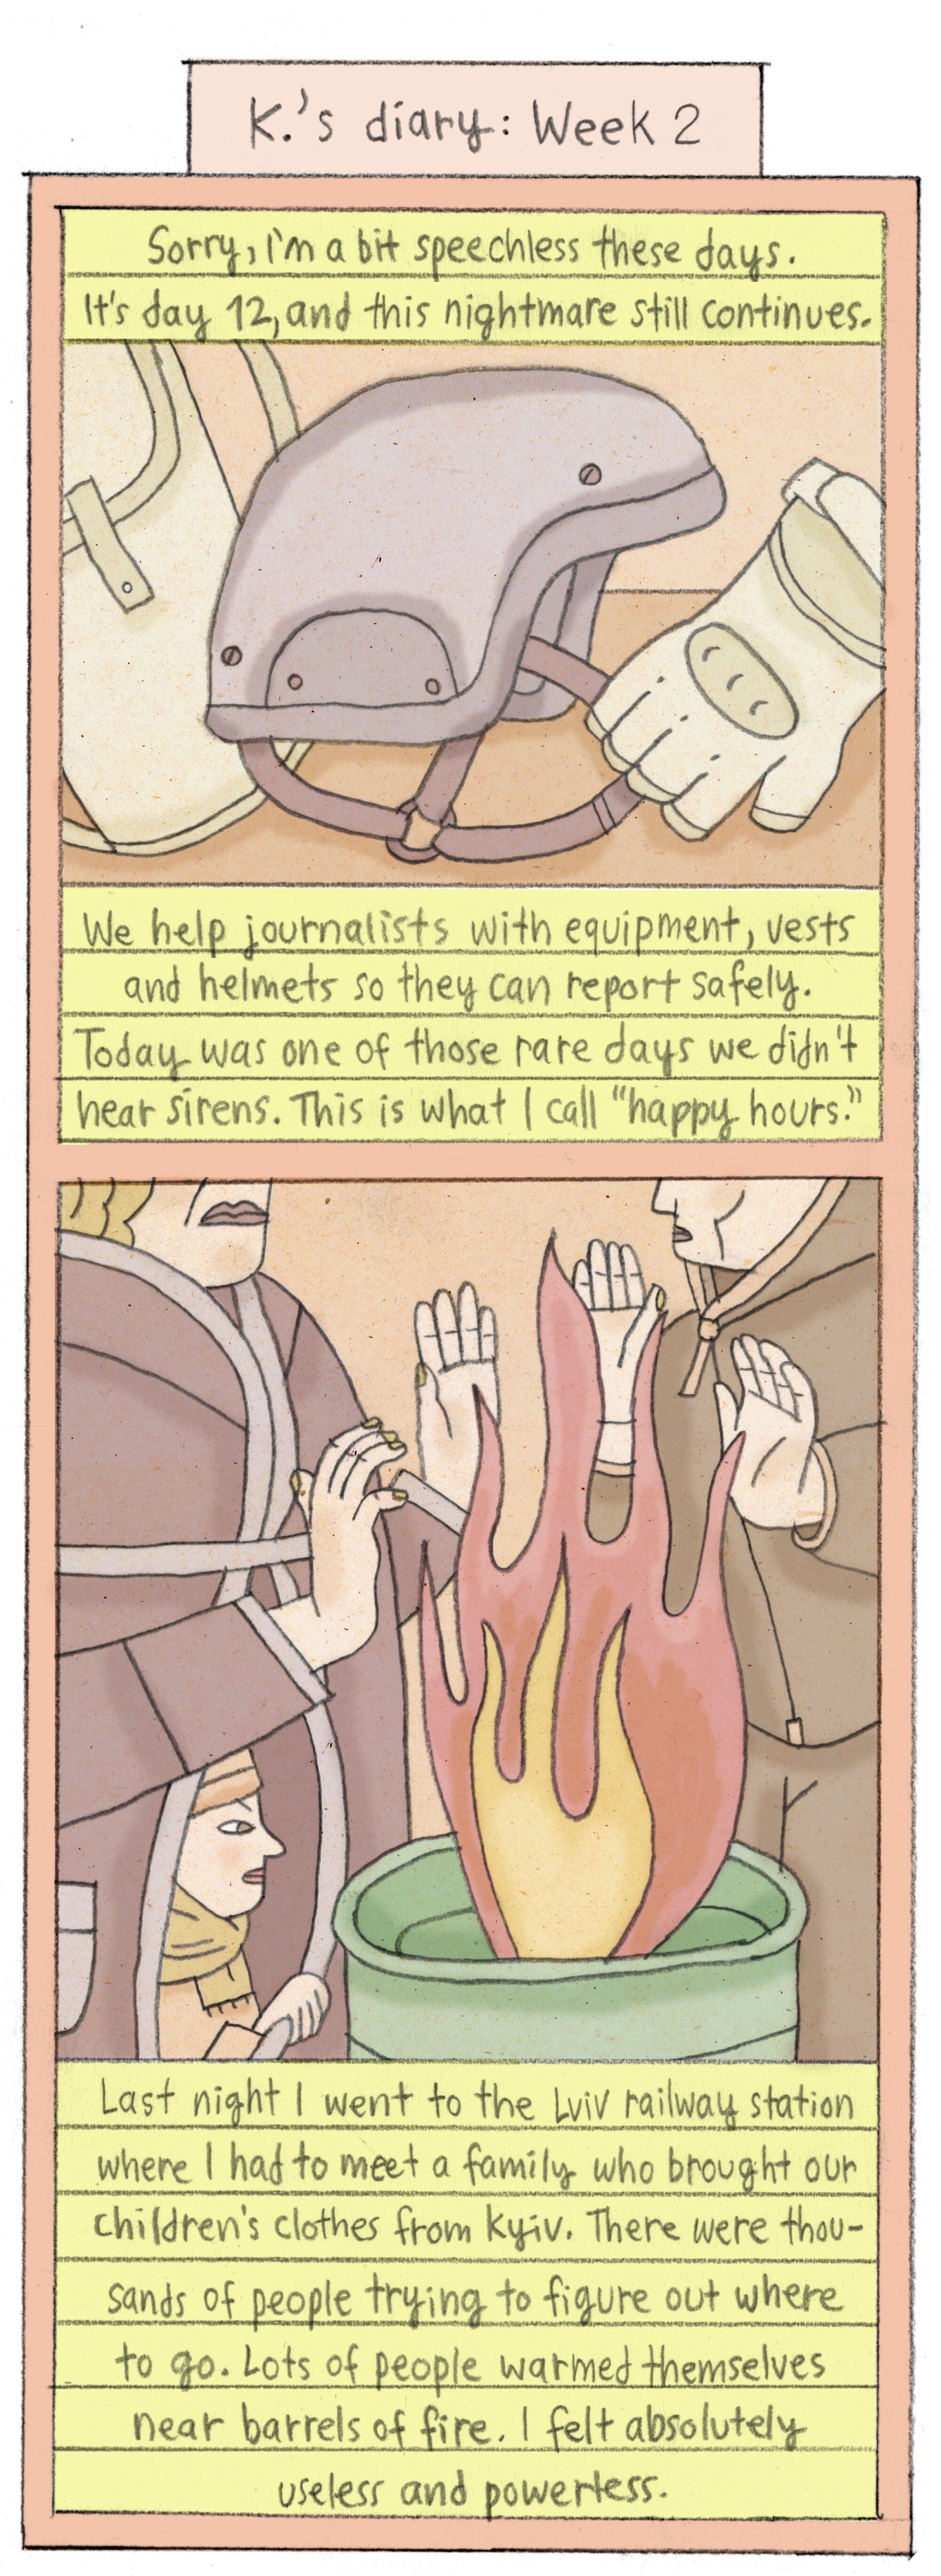 comic panels describe helping journalists with equipment, families warming by a fire in a barrel